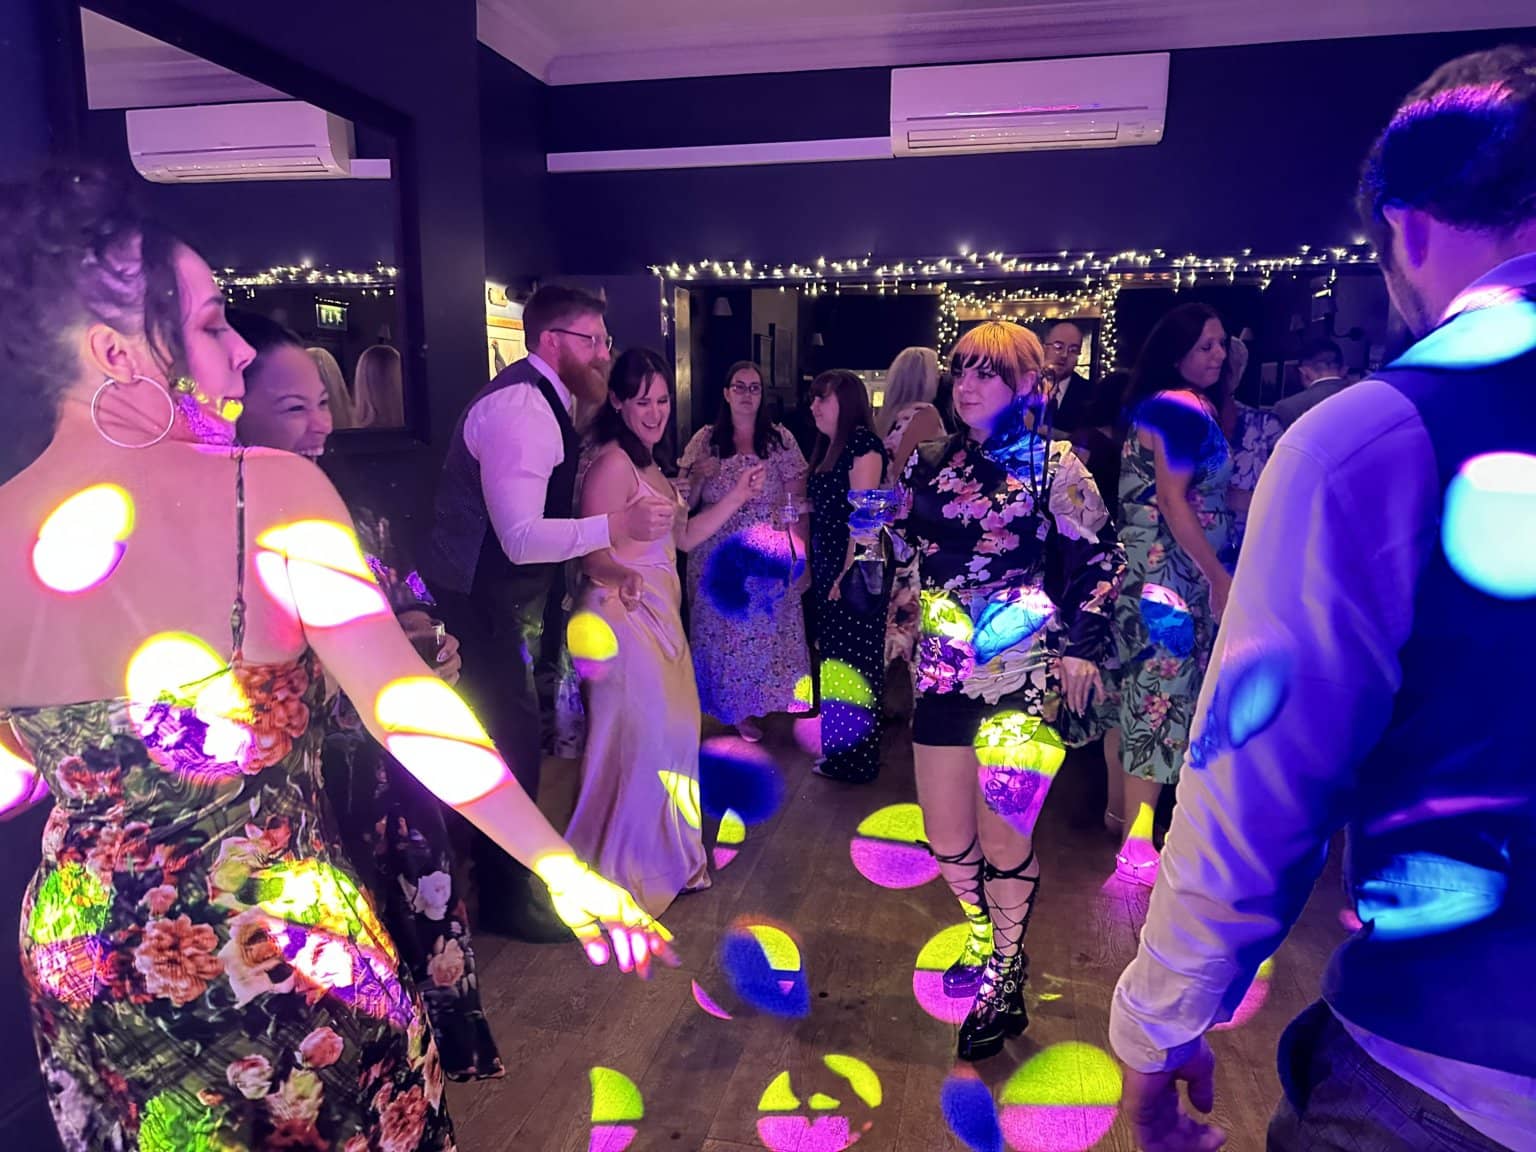 Full Dance Floor at Georgian Townhouse Norwich - playing music you want to hear